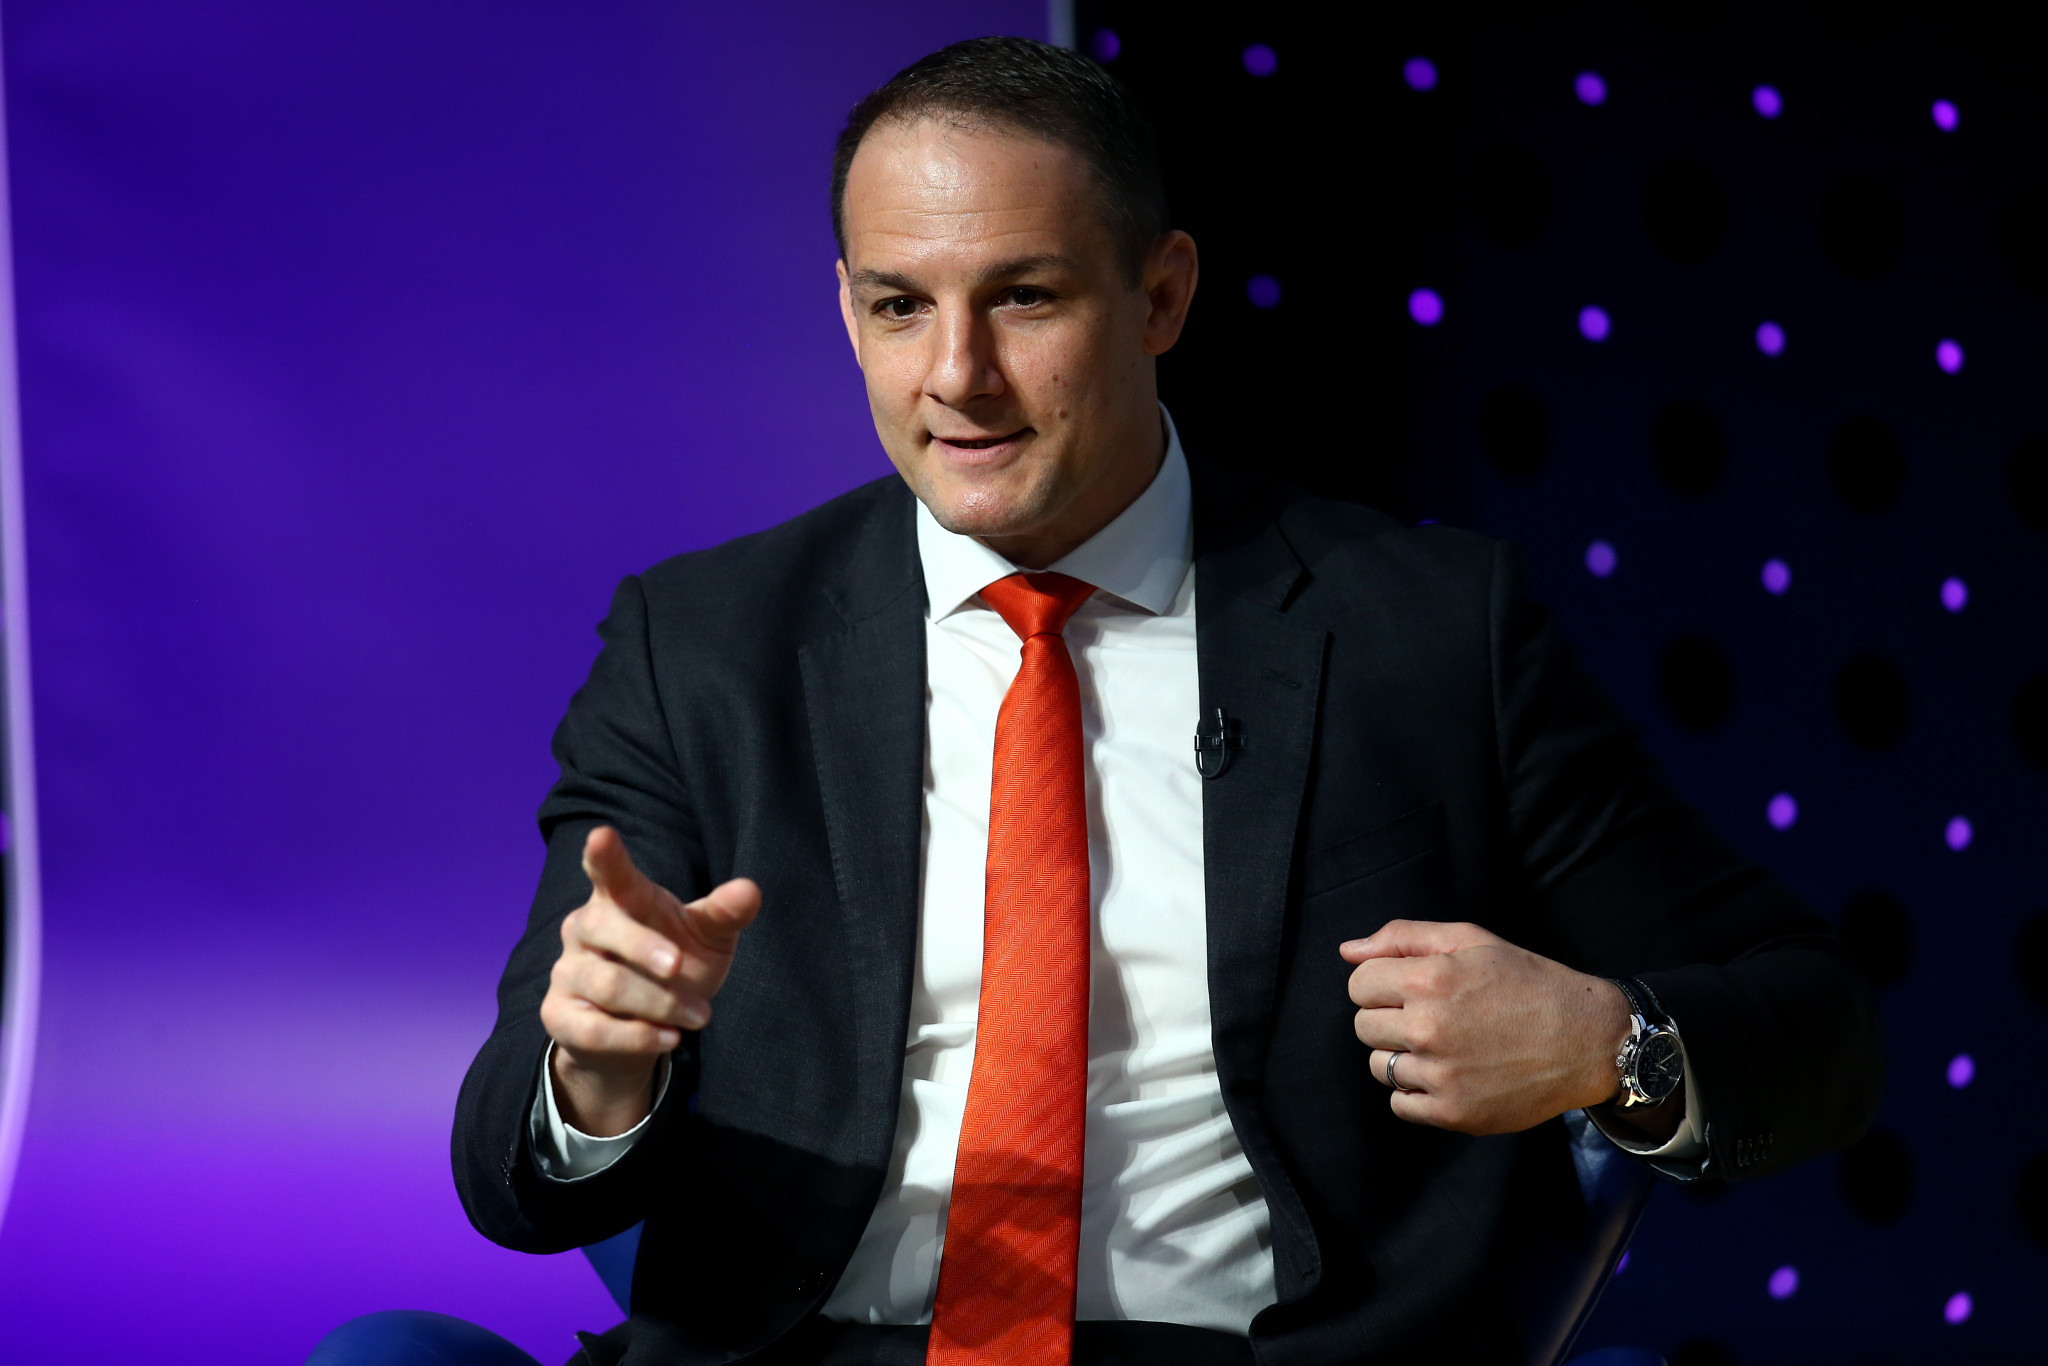 David Grevemberg has suggested the Commonwealth Games could work as part of a planned stimulus package ©Getty Images